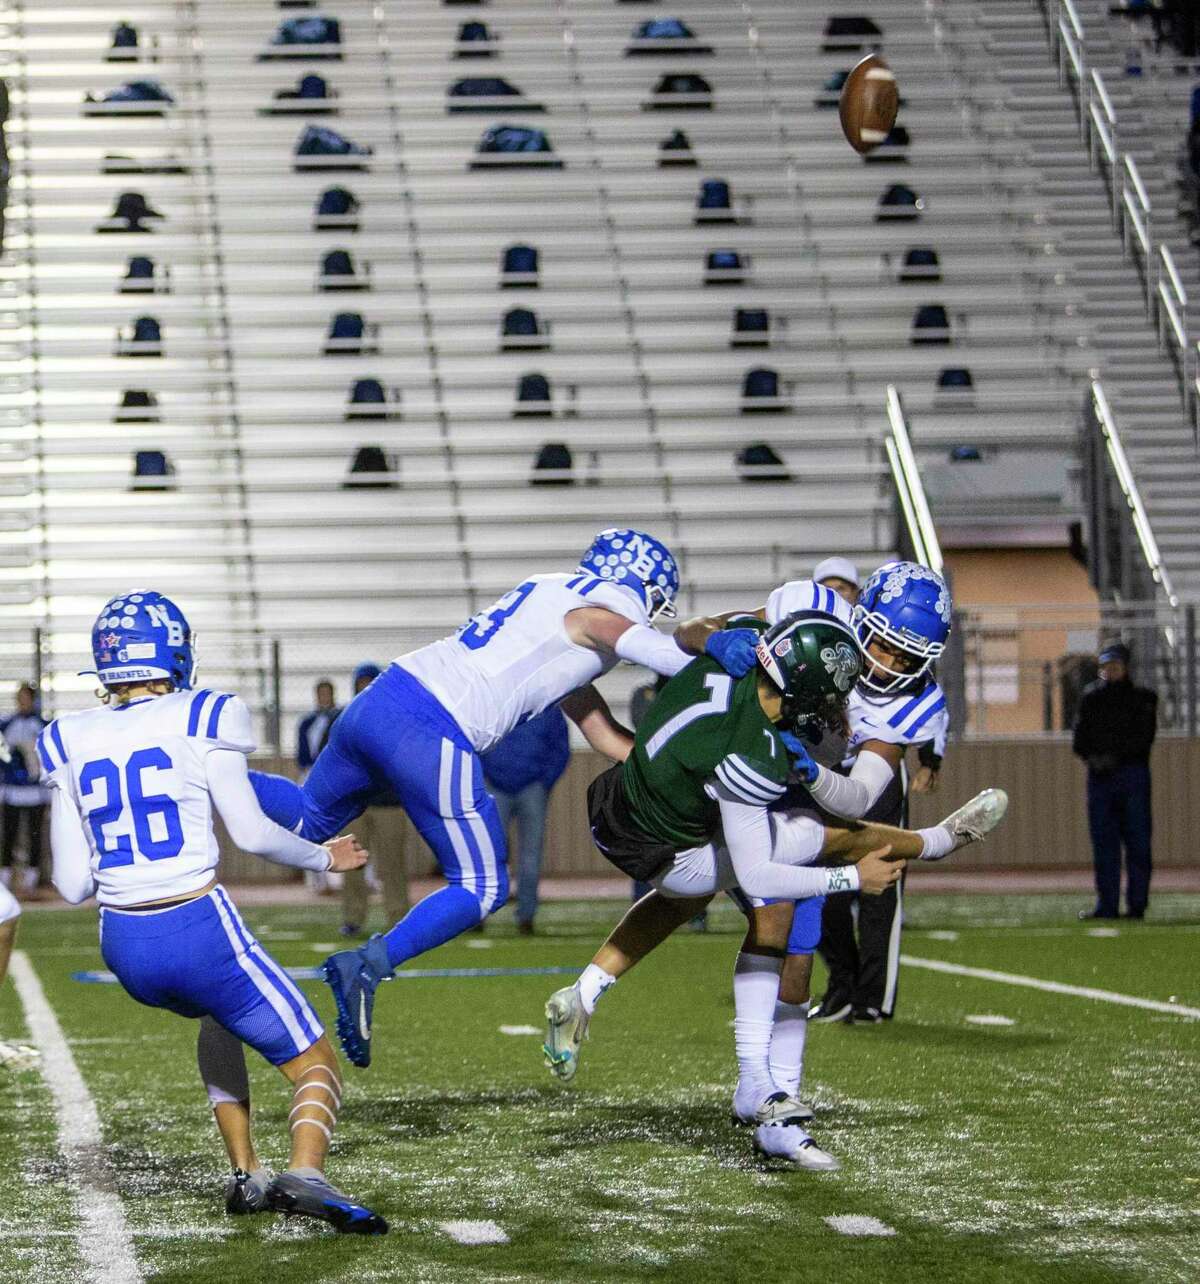 The football flies into the air as Reagan punter Matt Velasco, who signed with Texas State, is tackled Friday night, Nov. 11, 2022 at Comalander Stadium by New Braunfels’ James Archer, left, and Kaden Baerwald after a bad snap caused Velasco to drop the ball. New Braunfels’ Landon Jones is also seen at far left.